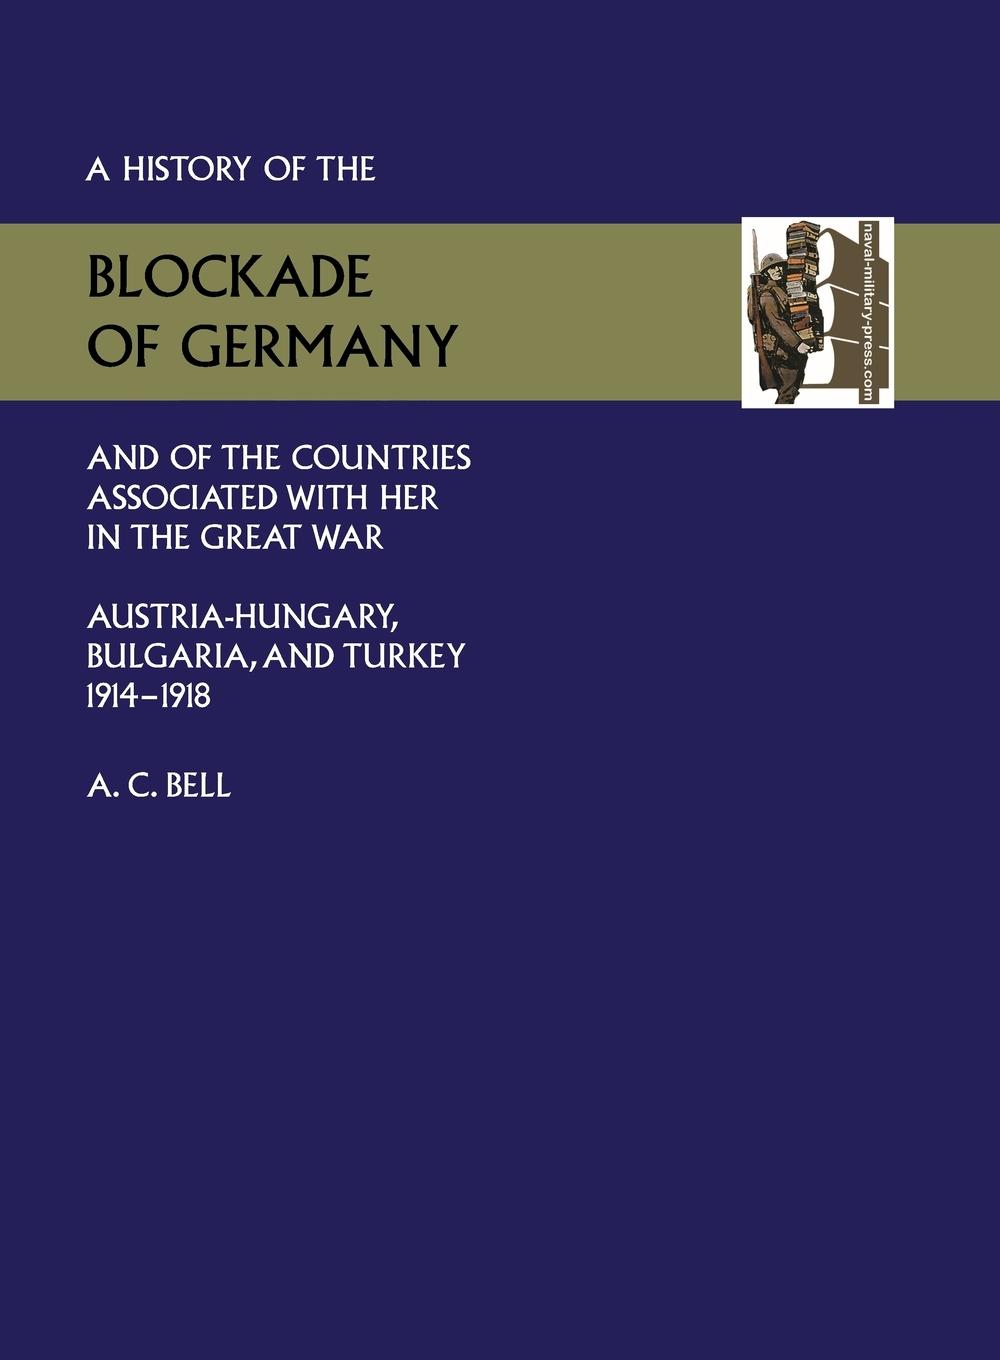 HISTORY OF THE BLOCKADE OF GERMANY AND OF THE COUNTRIES ASSOCIATED WITH HER IN THE GREAT WAR - C. Bell (Historical Section, Committee O